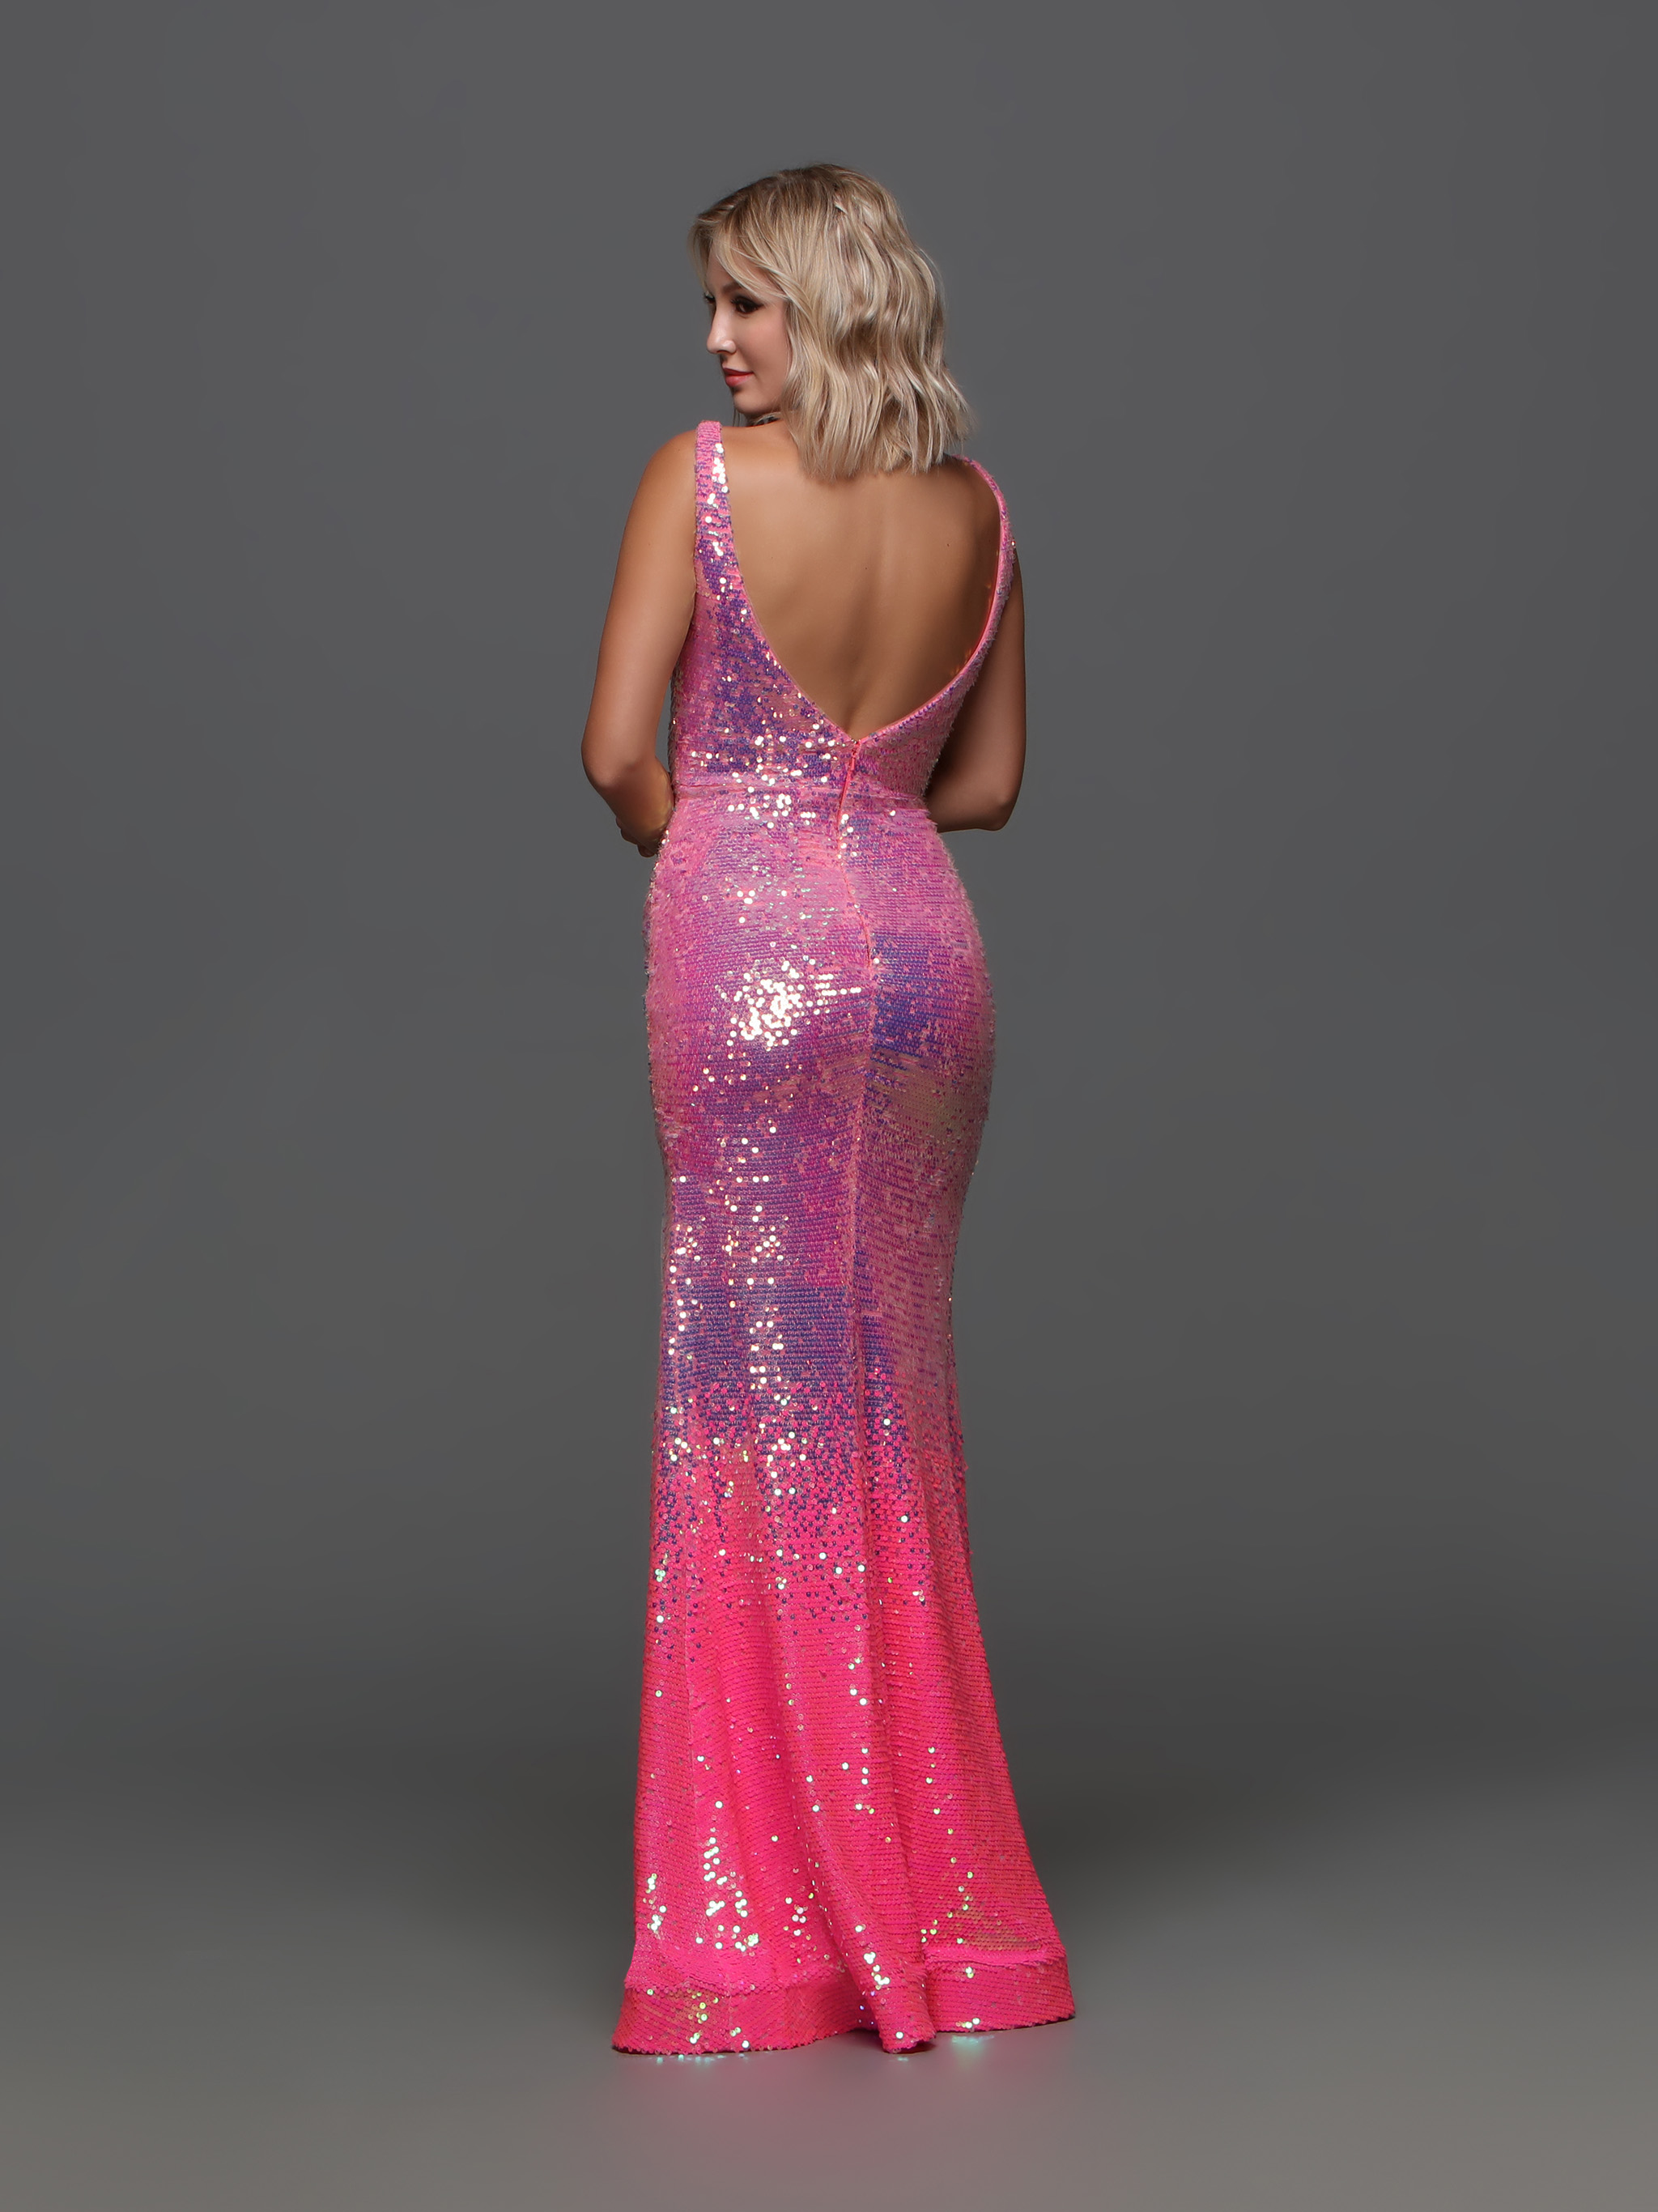 Image showing back view of style #72301